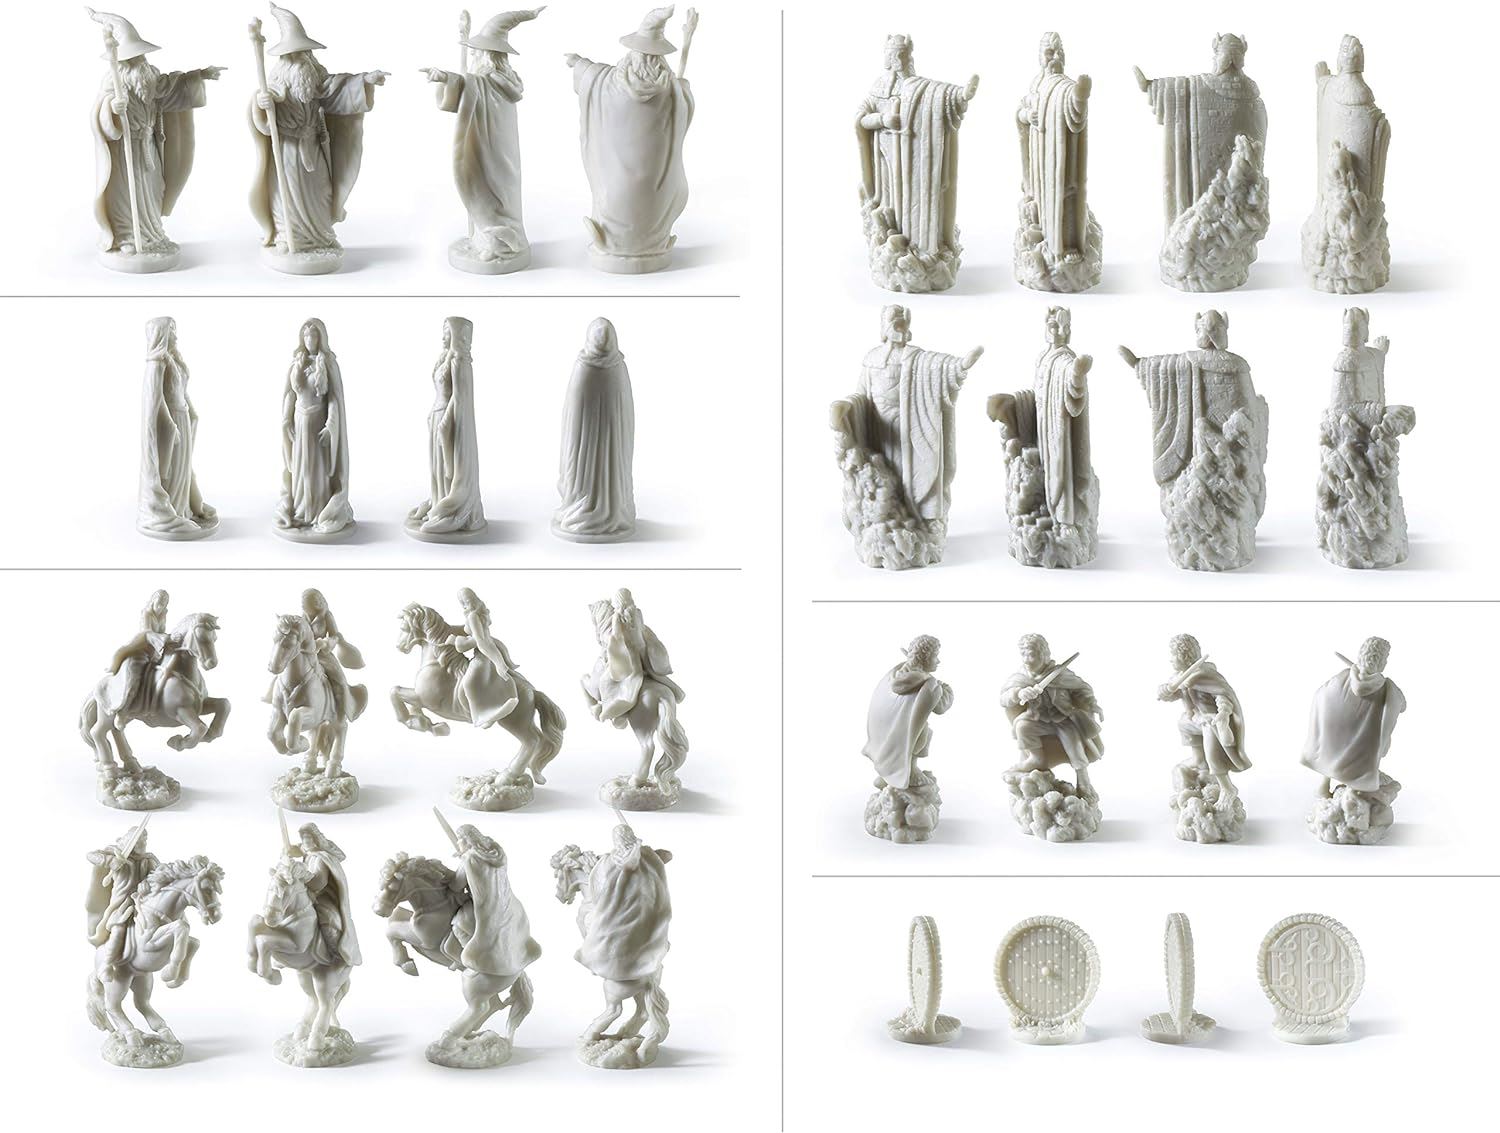 Battle For Middle-Earth Lord of the Rings Chess Set NN2174 The Noble Collection